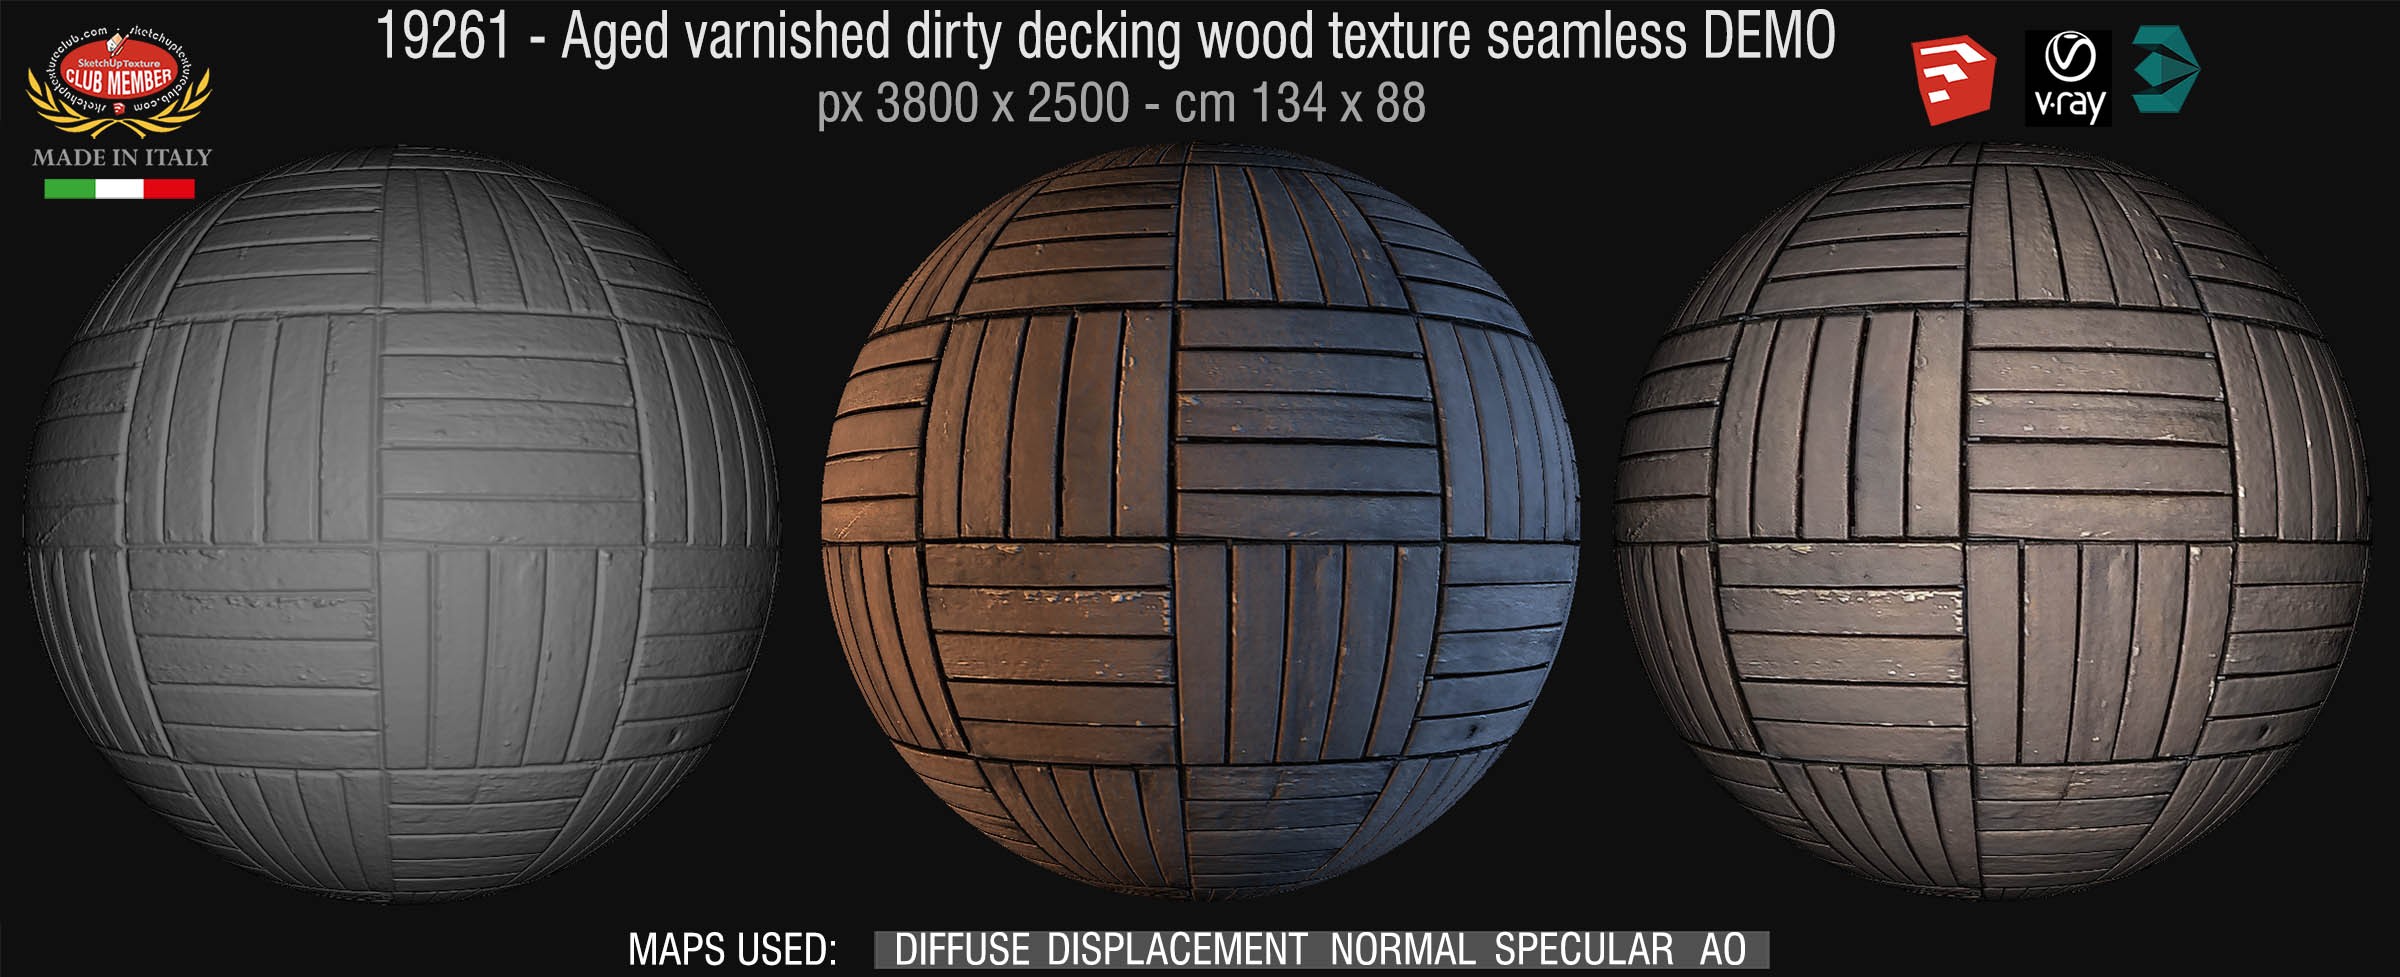 19621 HR Aged varnished dirty decking wood cm 10x10 texture seamless + maps DEMO